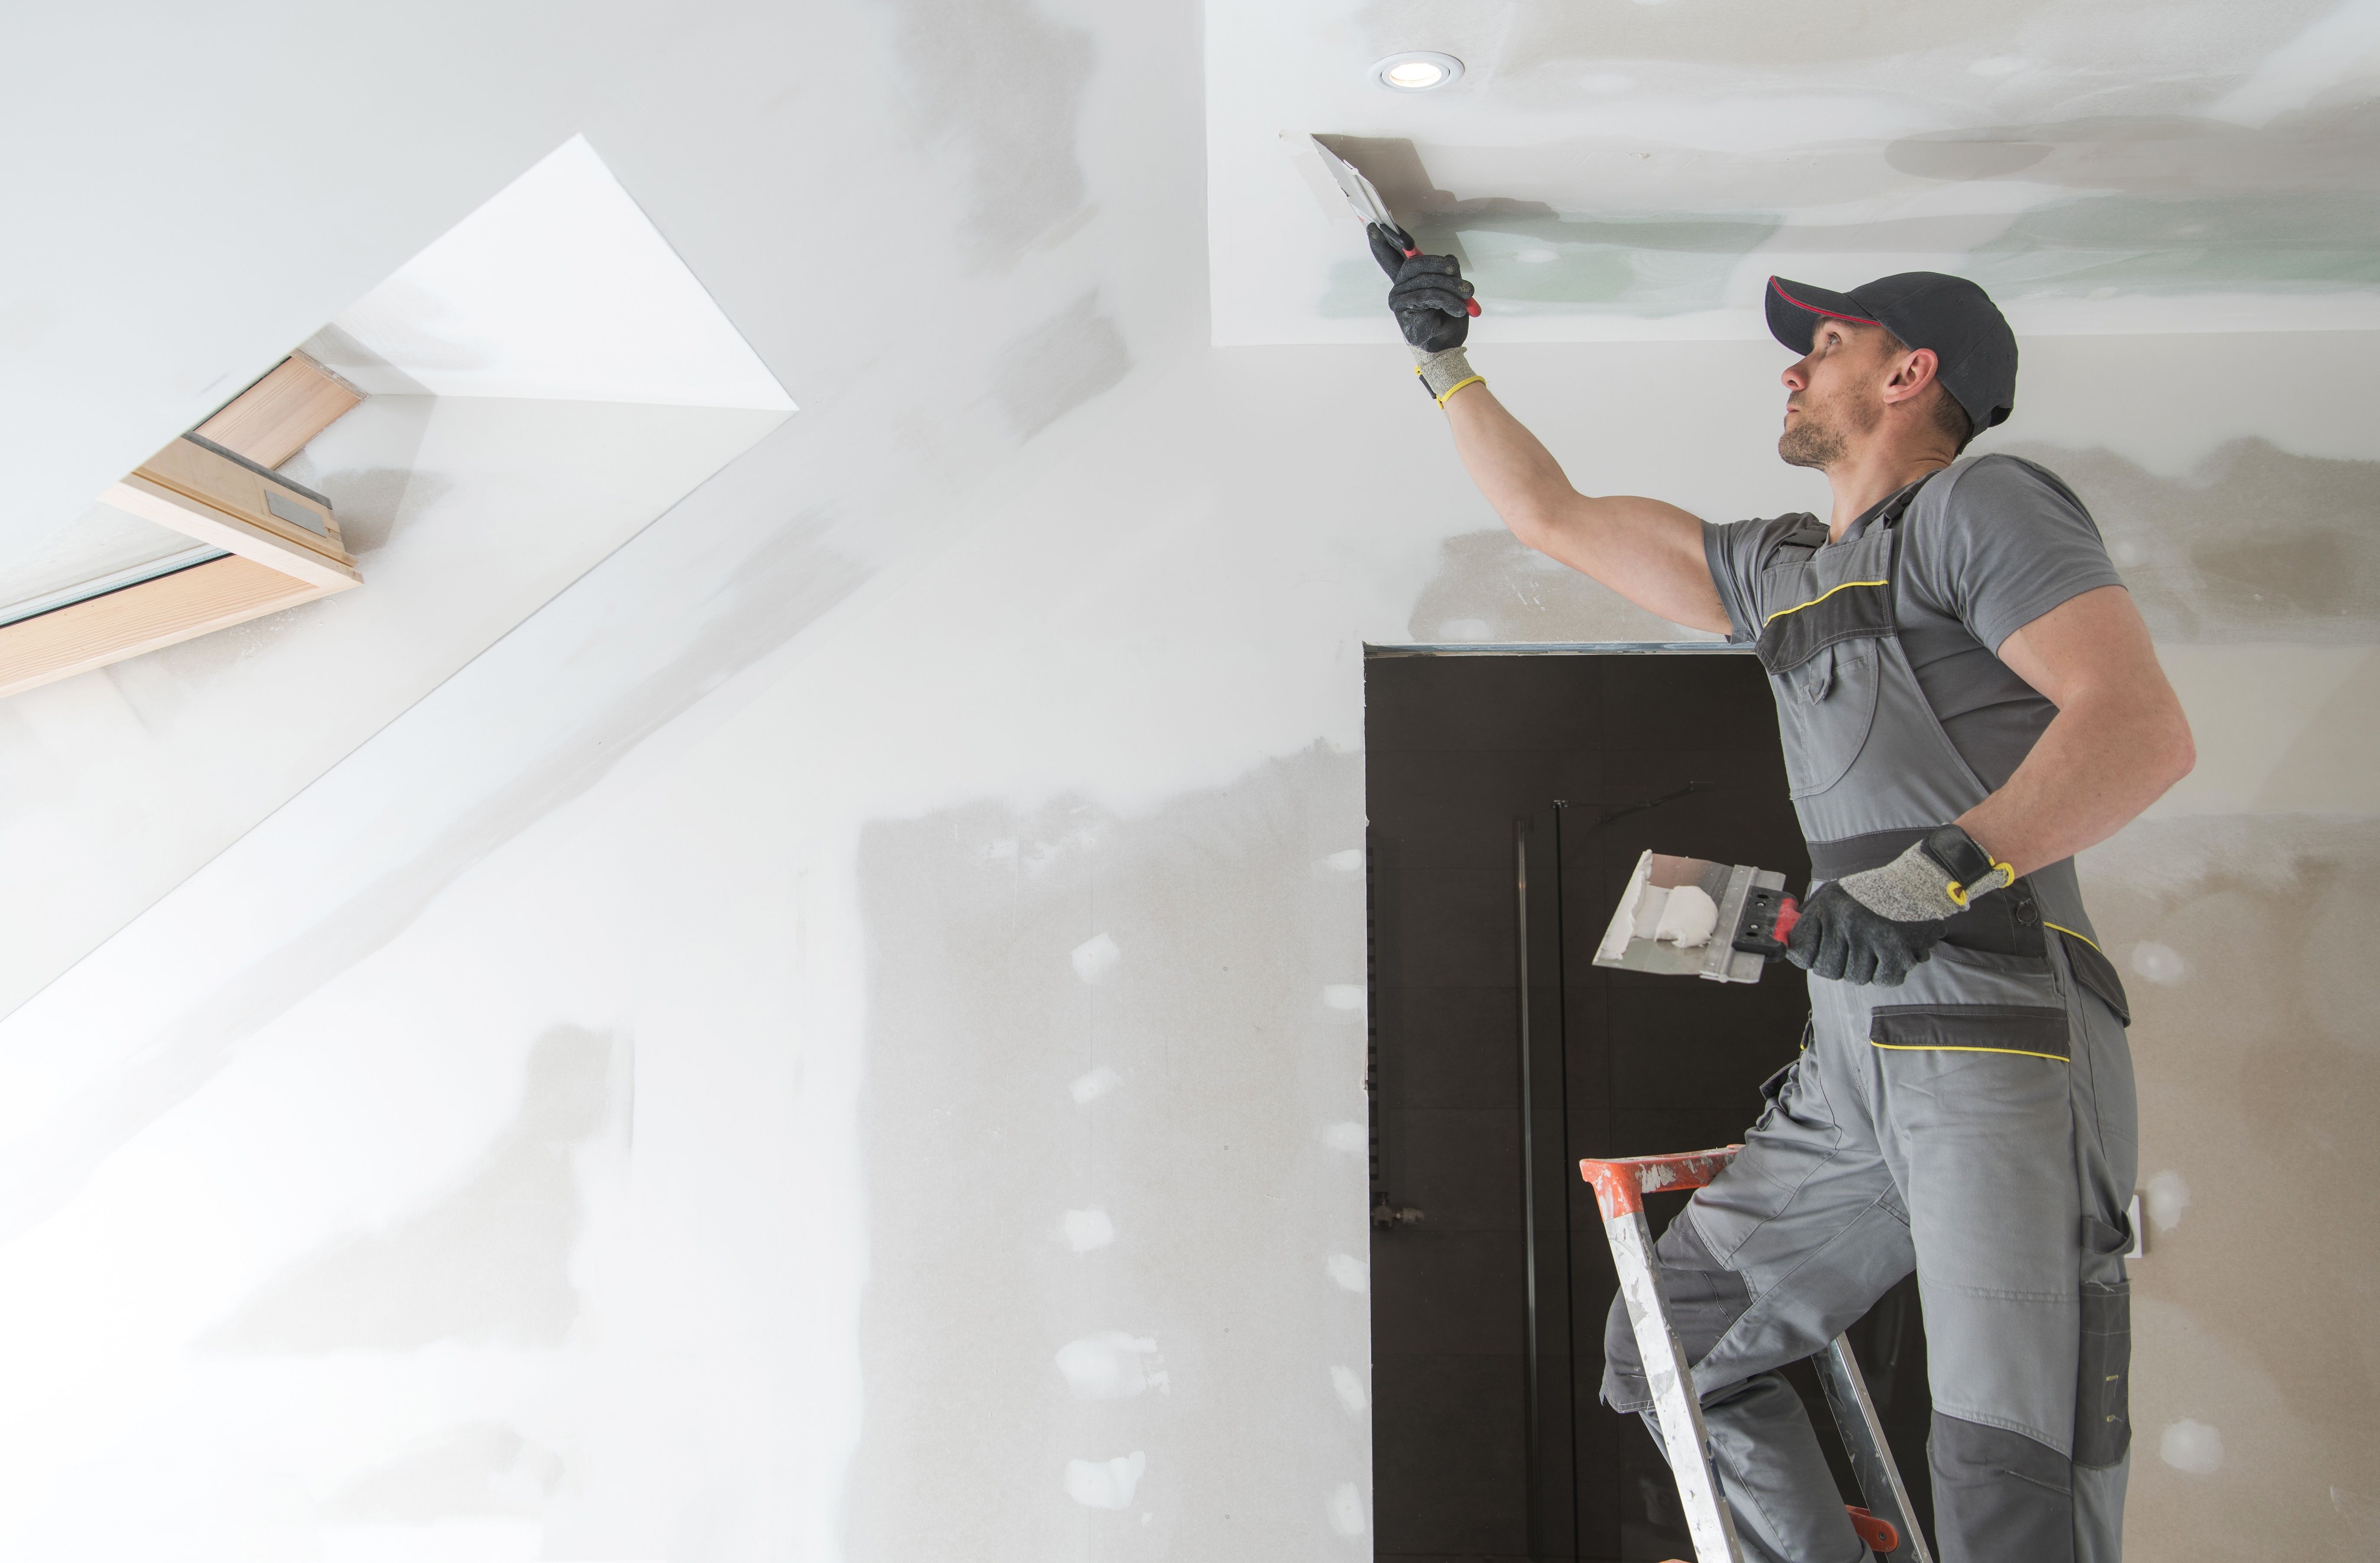 Our Drywall and Plastering service is tailored specifically for your needs. We are licensed and knowledgeable in the industry, so you can be sure the job will be done right. We take pride in our work and always strive for excellence. for Cavanaugh Painting Inc in Springboro, OH